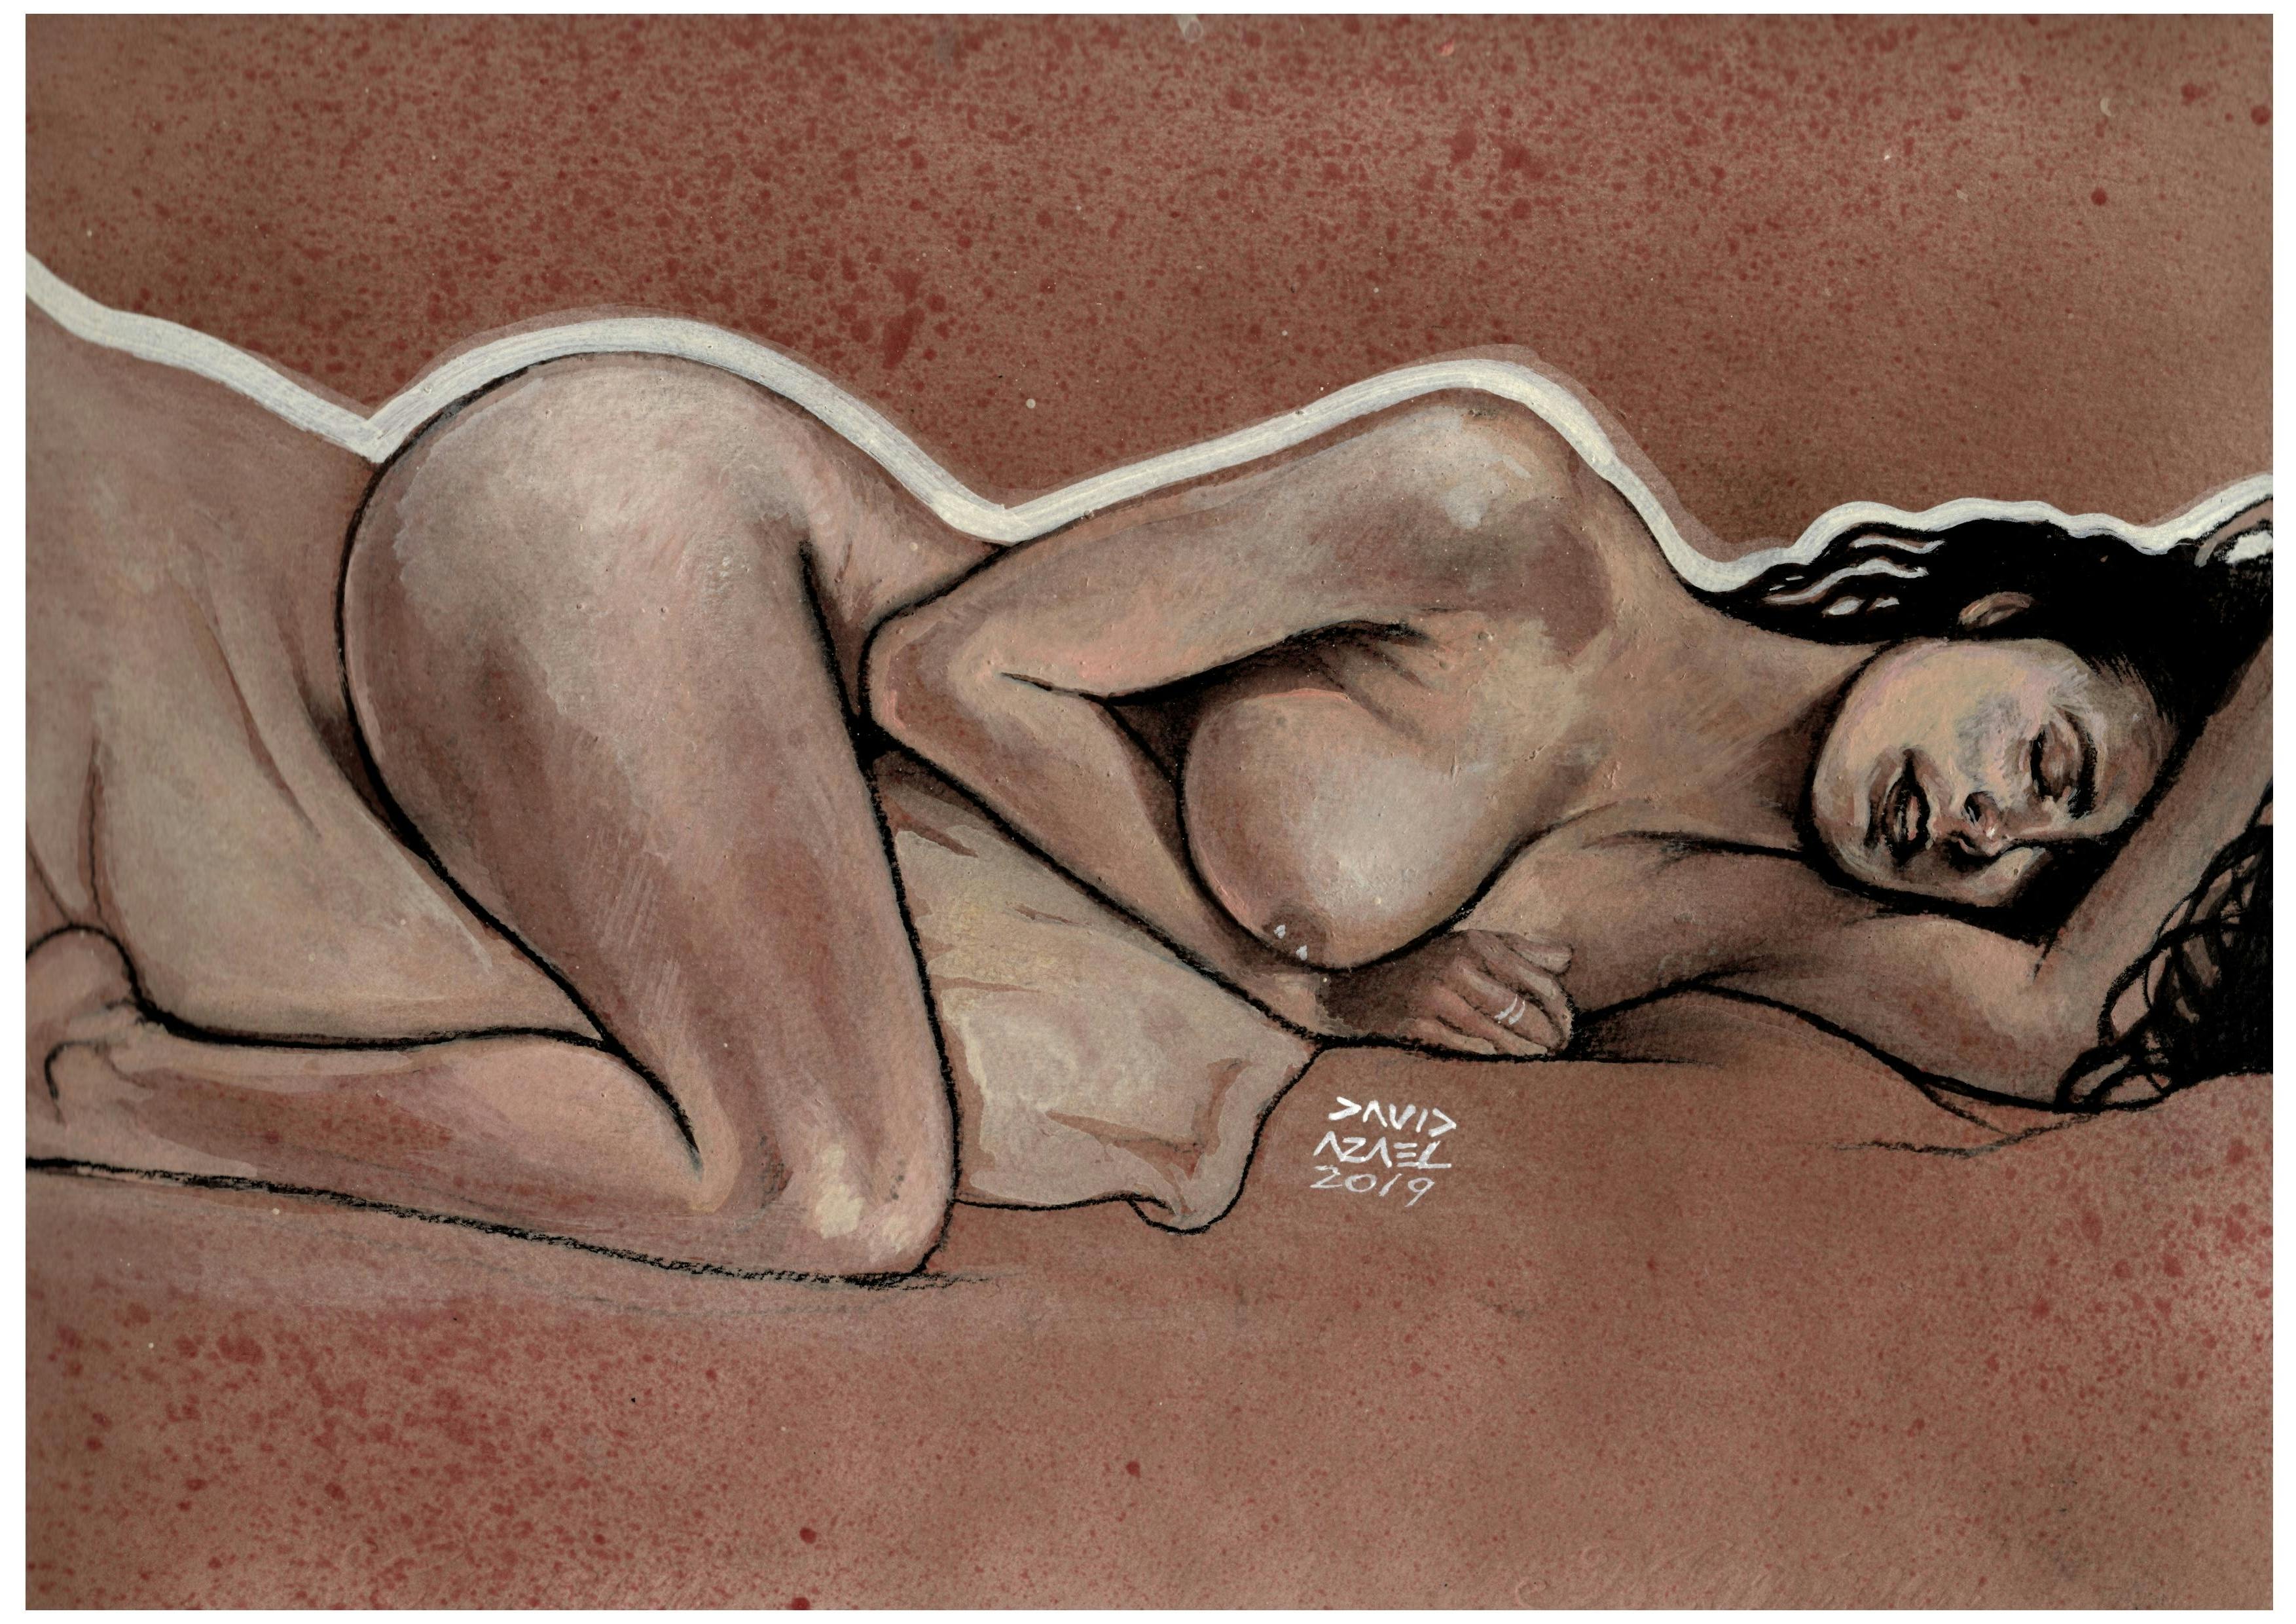 Porn Illustrations by David Azael | XConfessions Porn for Women